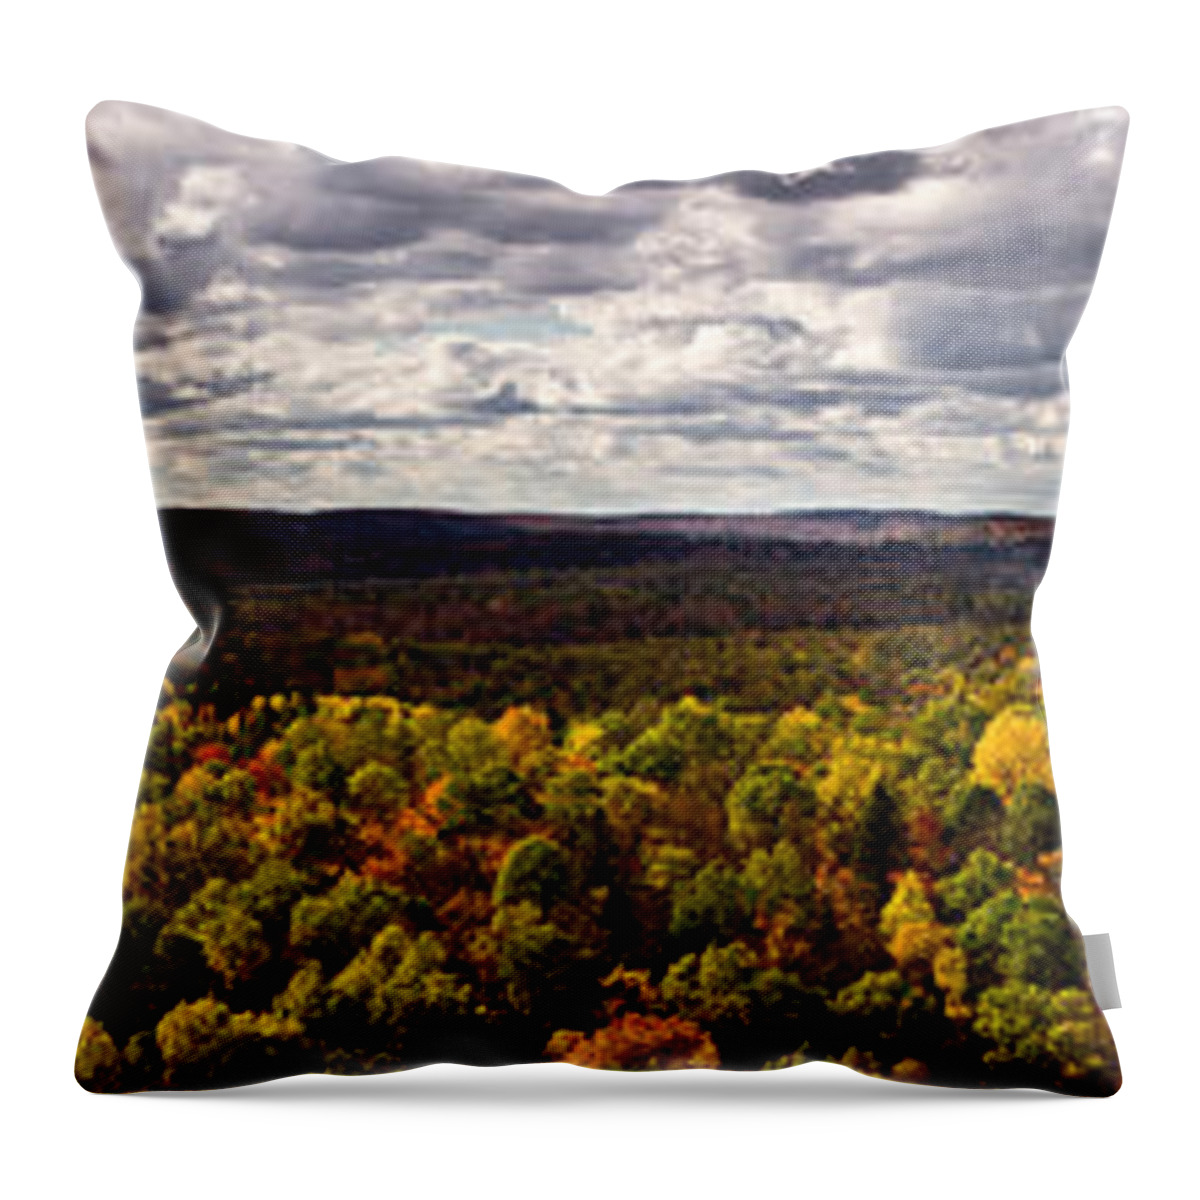 Algonquin Throw Pillow featuring the photograph Algonquin Park Panorama by Cale Best